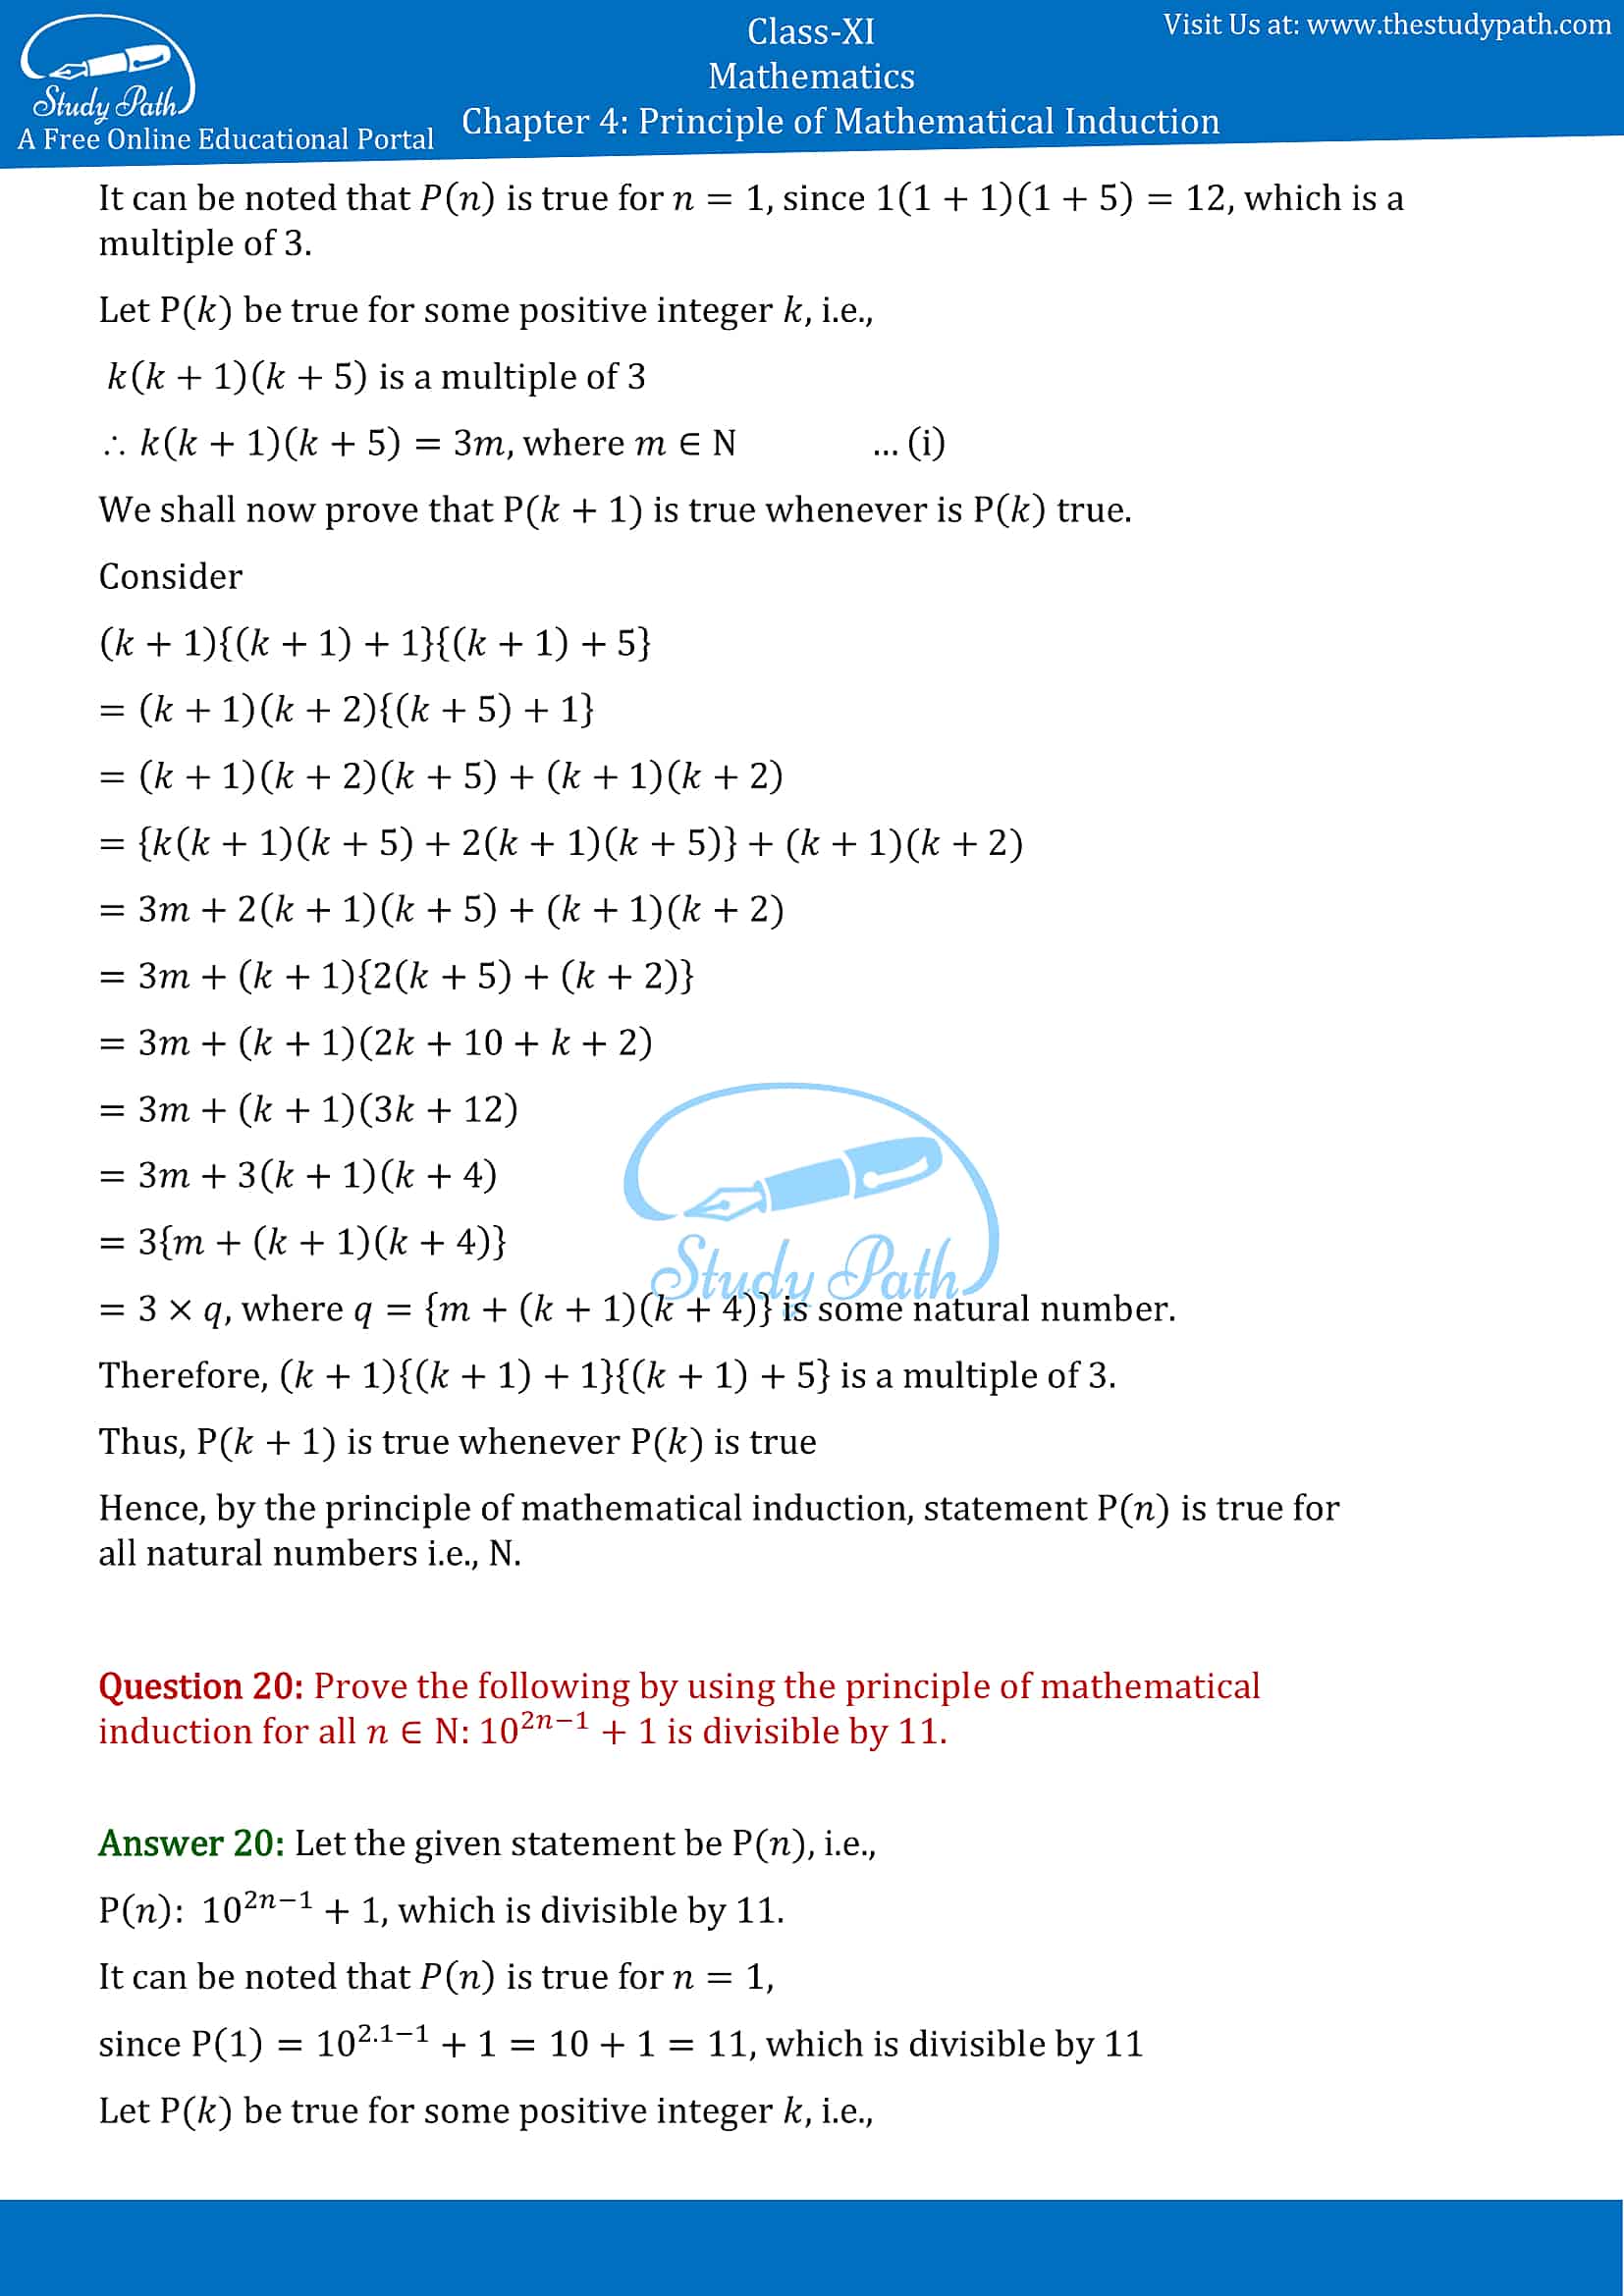 NCERT Solutions for Class 11 Maths chapter 4 Principle of Mathematical Induction